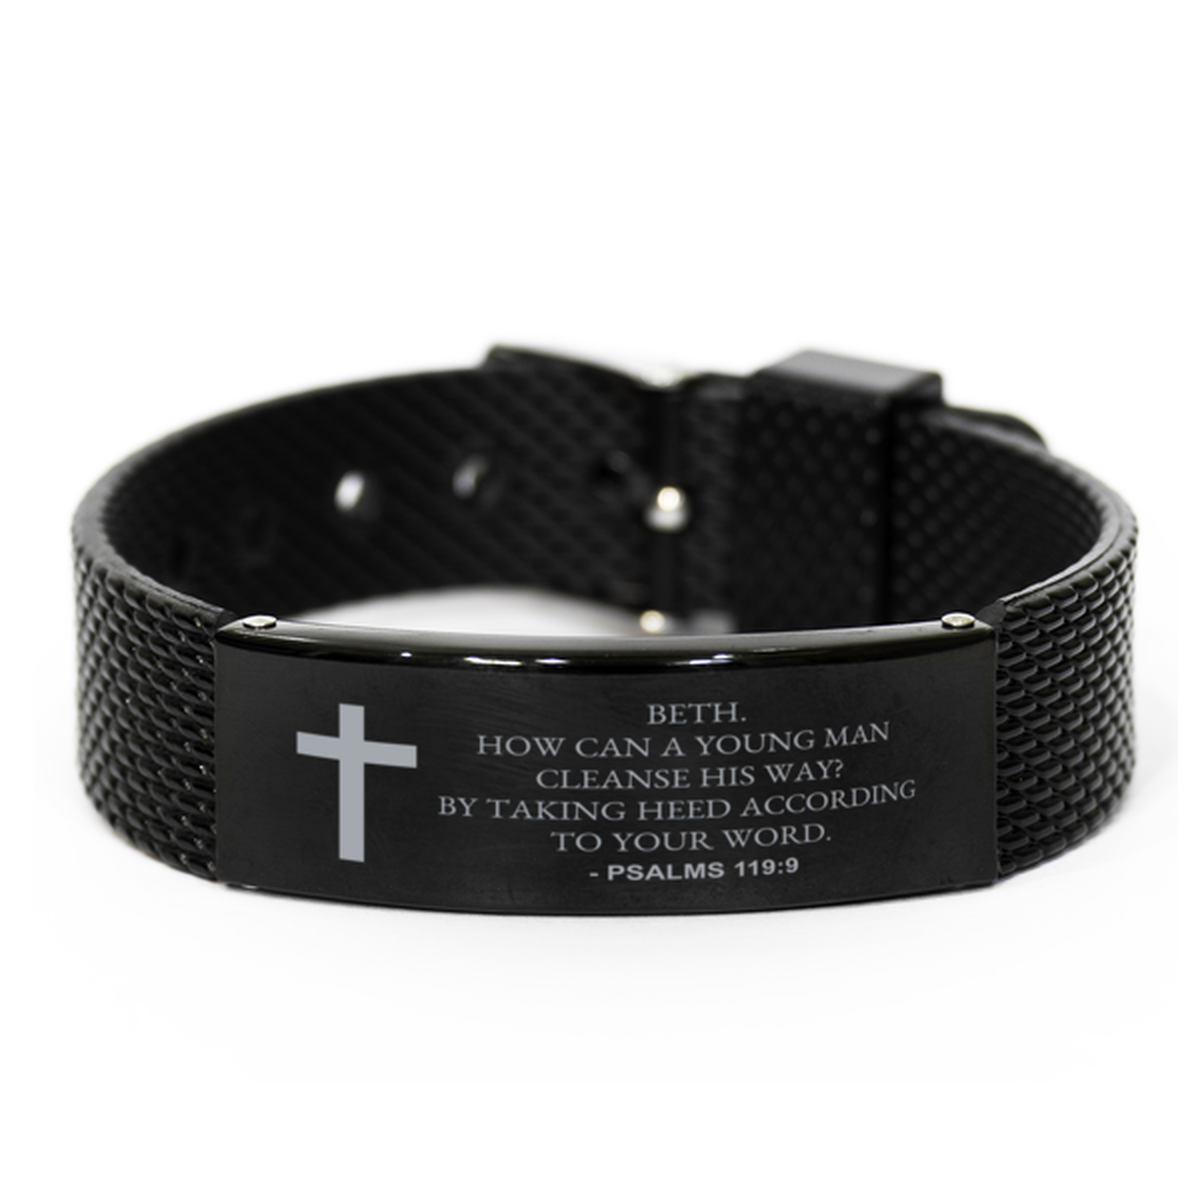 Christian Black Bracelet,, Psalms 119:9 Beth. How Can A Young Man Cleanse His Way? By, Motivational Bible Verse Gifts For Men Women